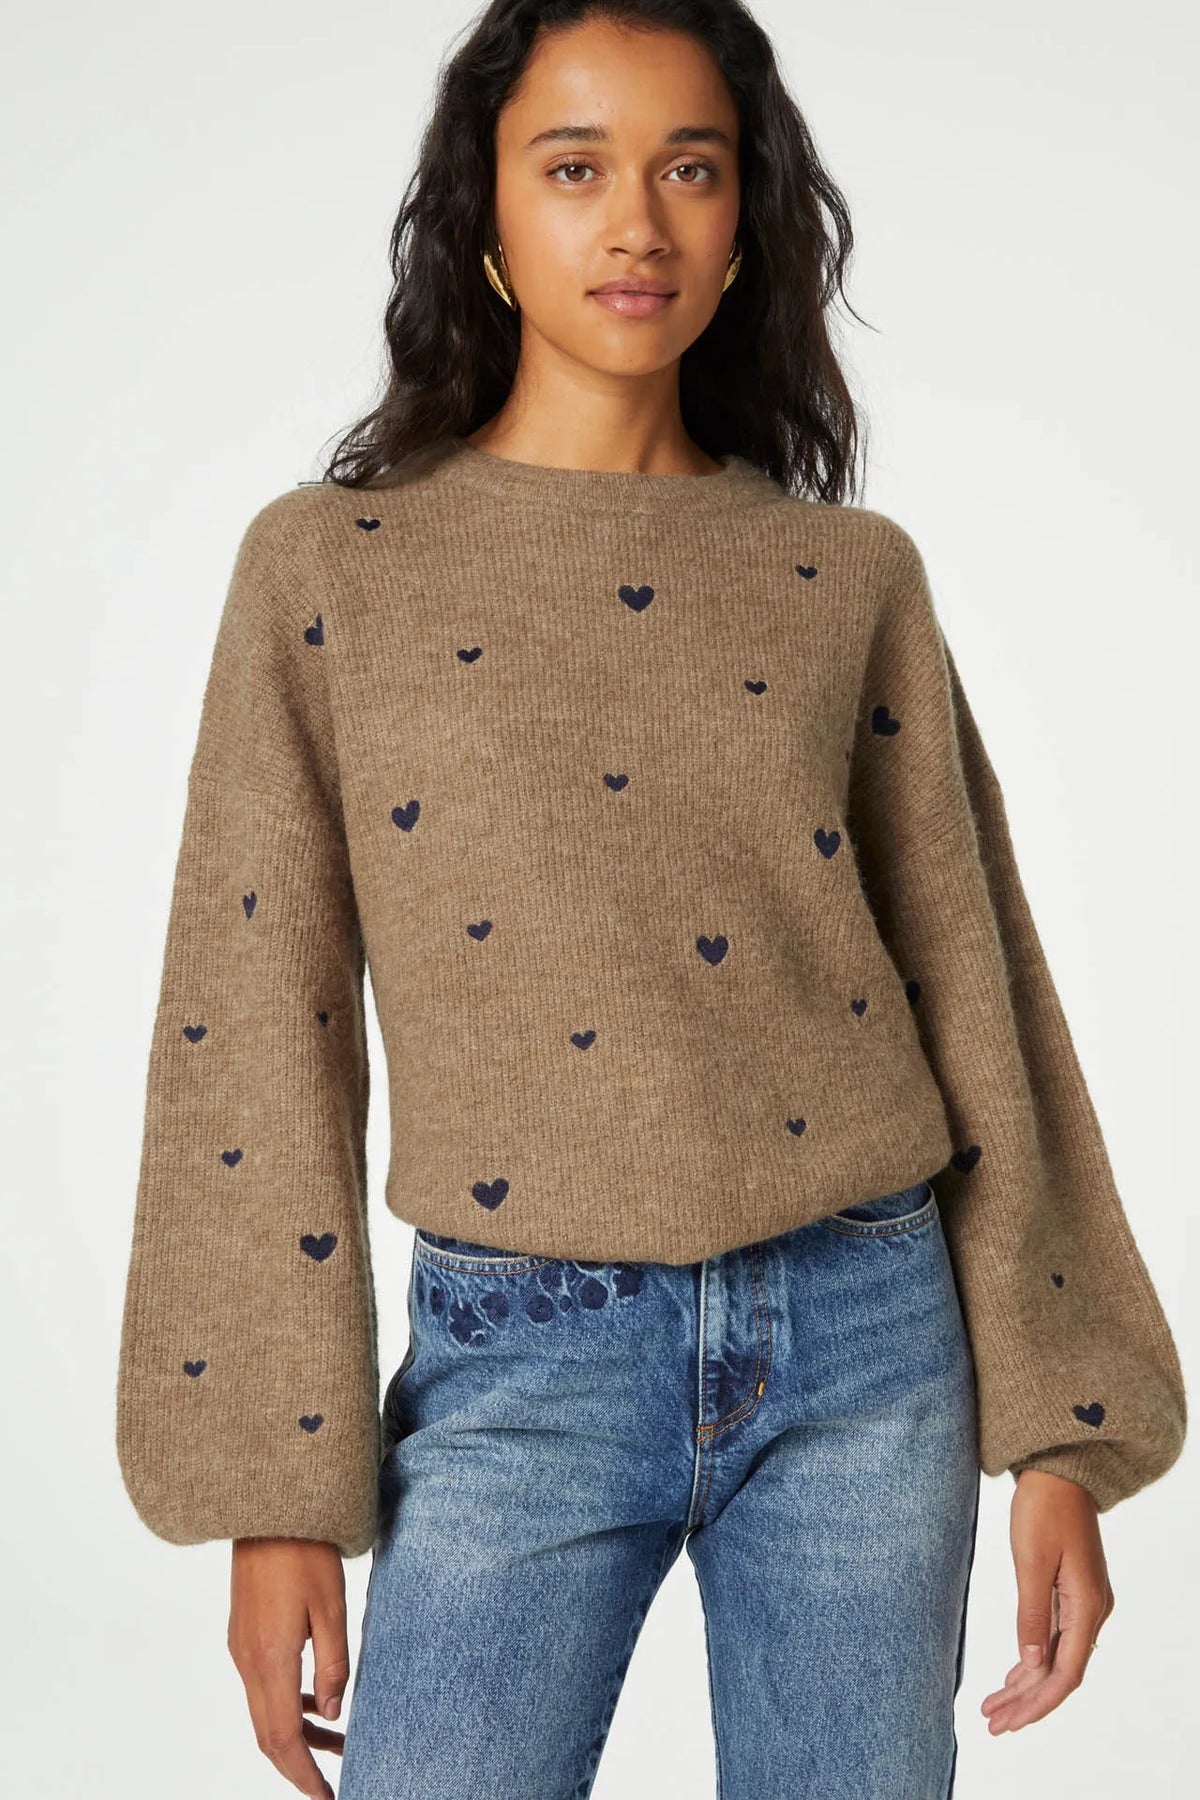 Brown jumper with purple embroidered hearts throughout